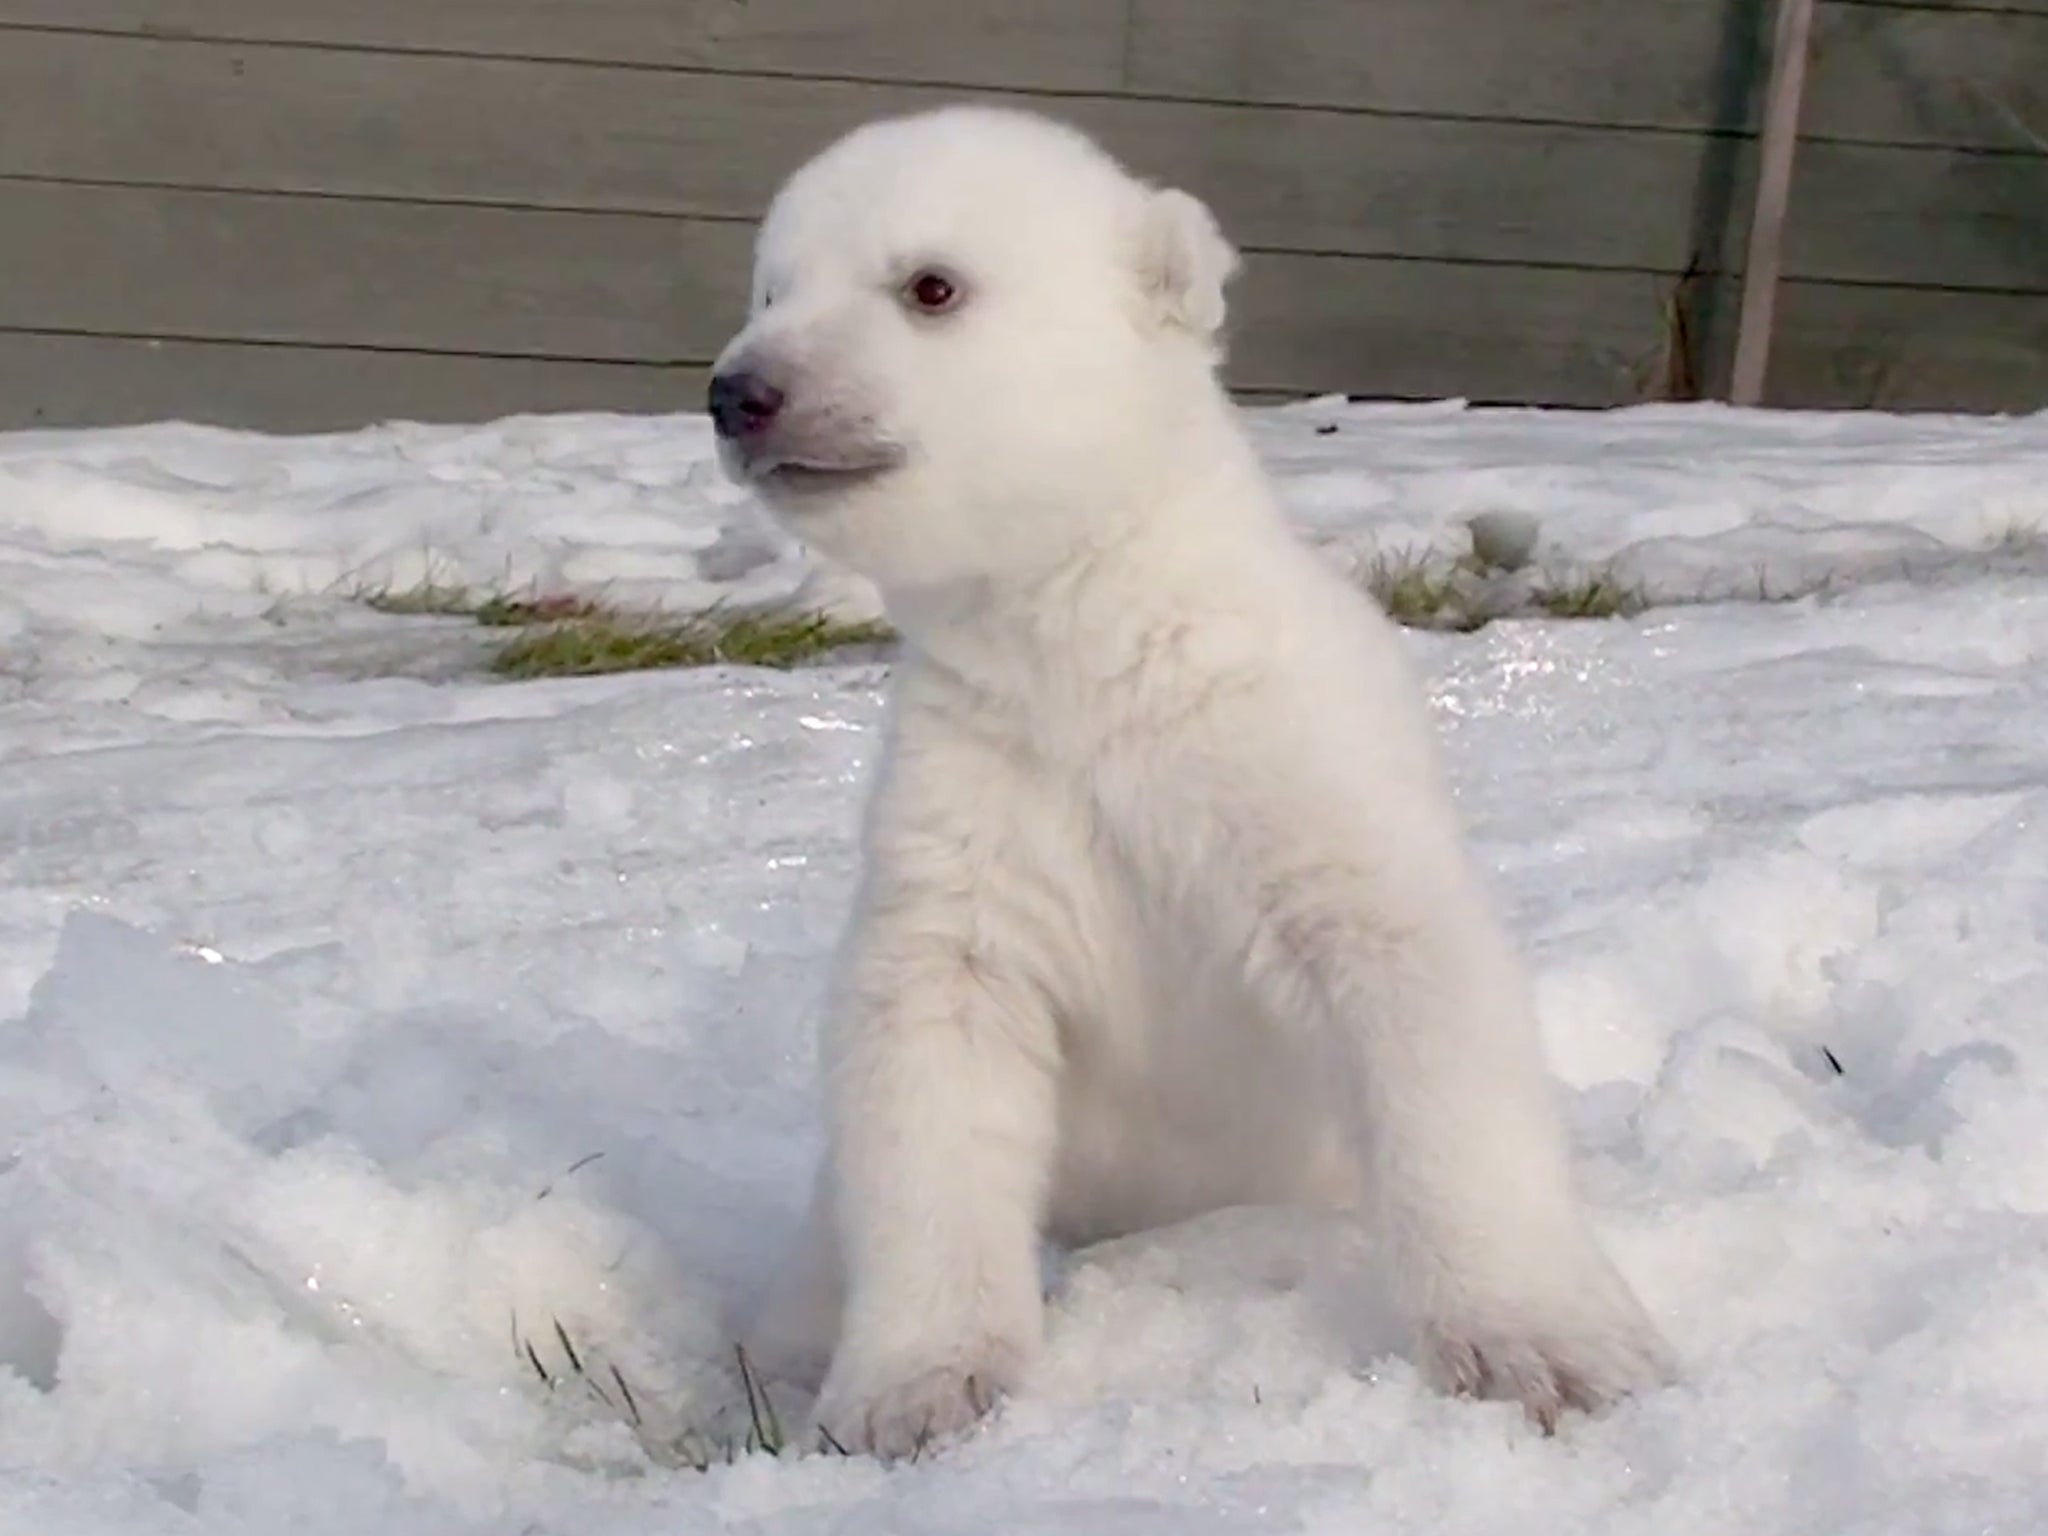 The three-month-old cub explores the snow rather apprehensively in the minute long clip